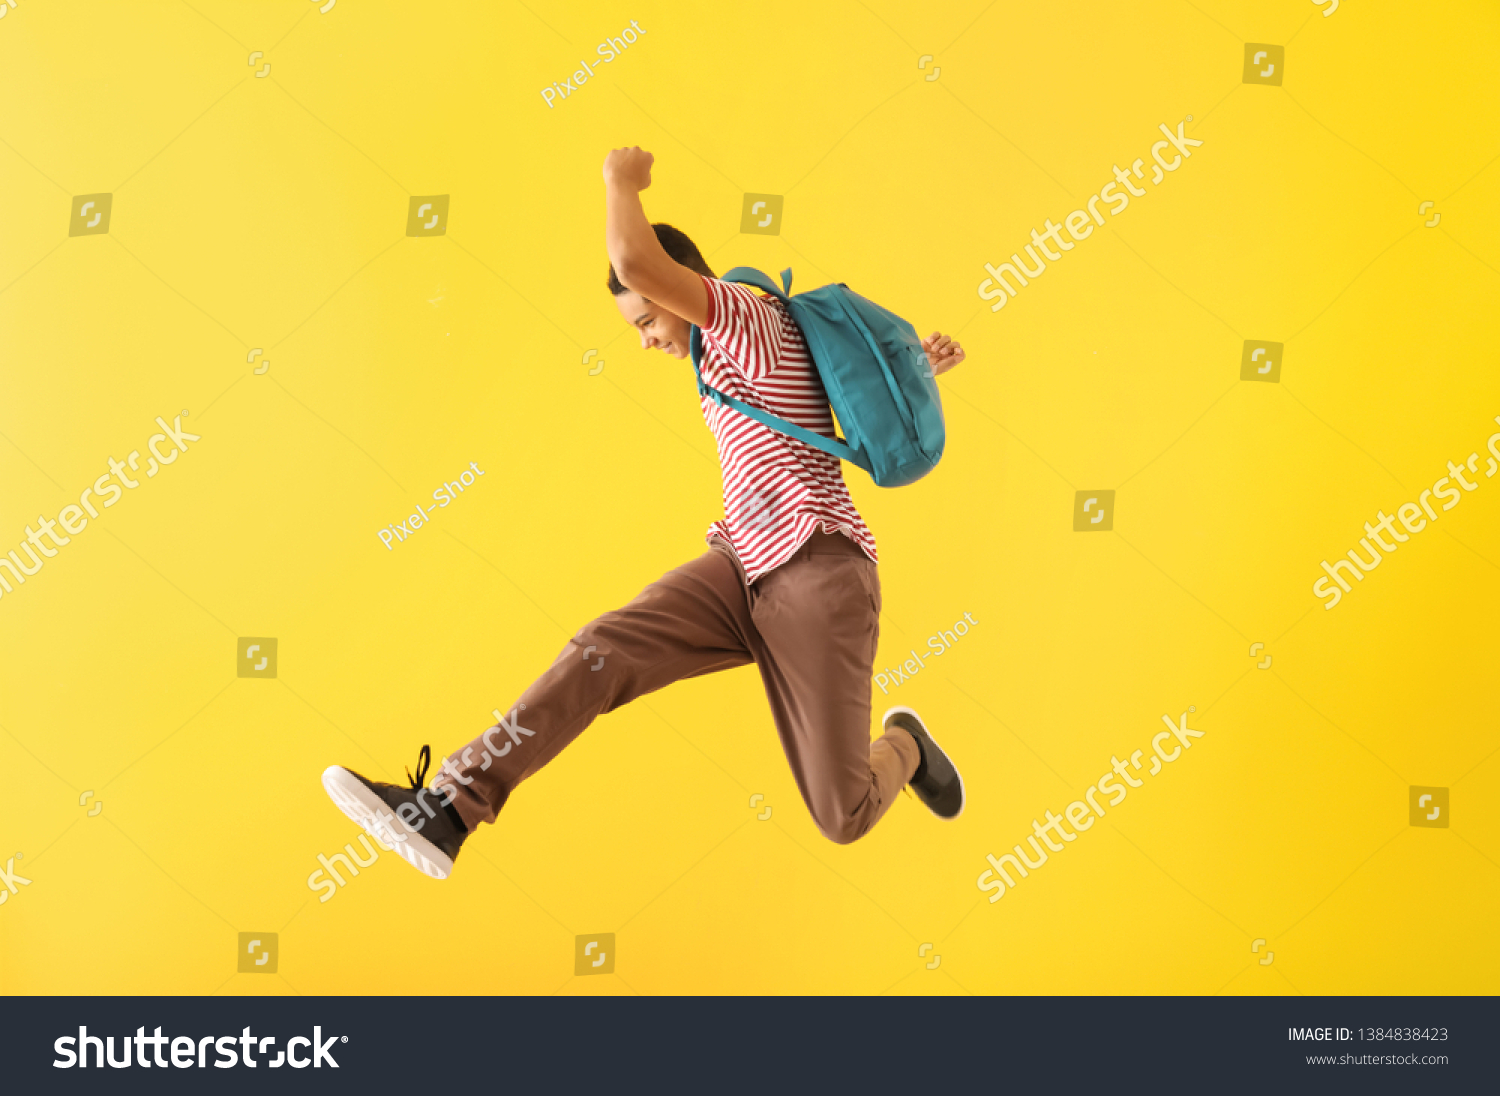 Portrait of jumping African-American teenage boy on color background #1384838423